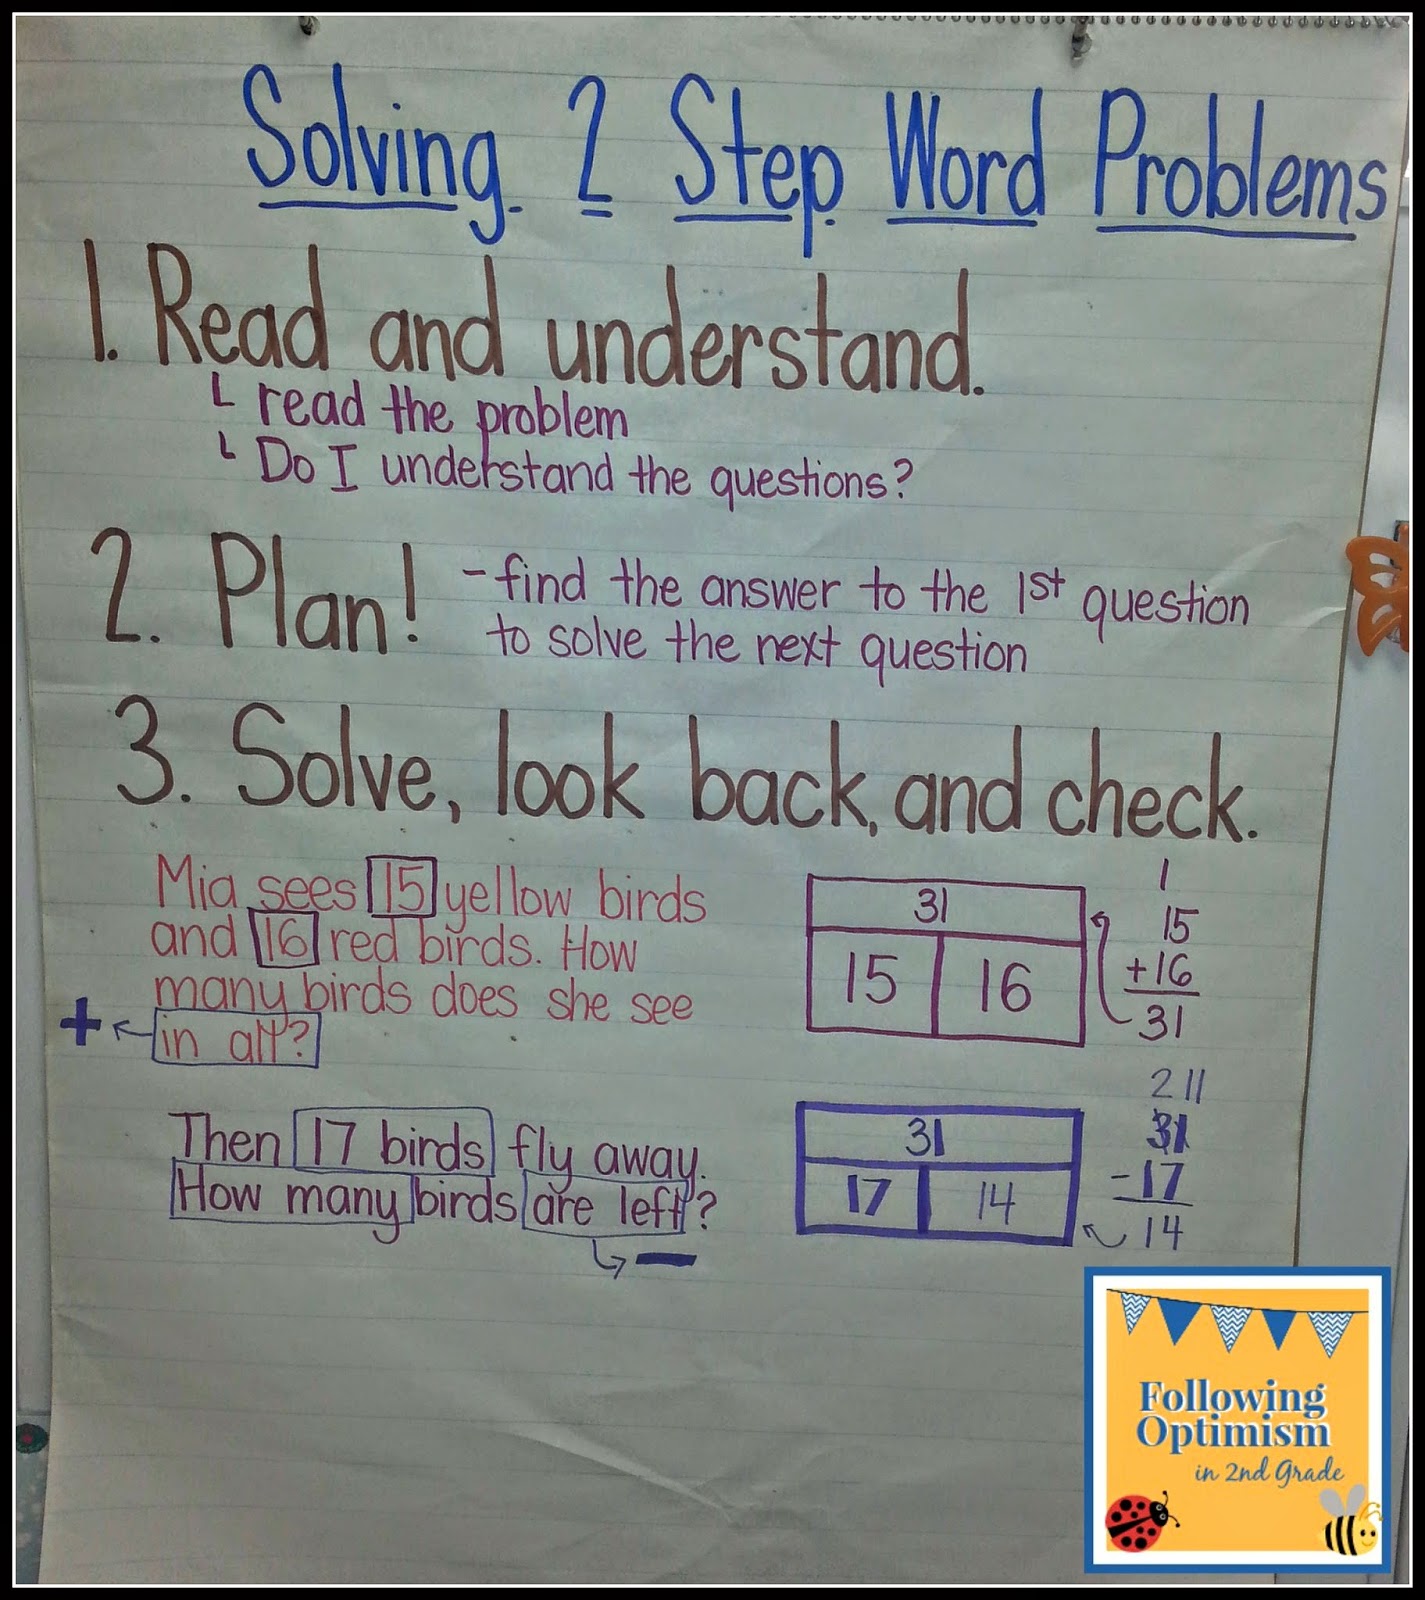 following-optimism-in-2nd-grade-two-step-word-problems